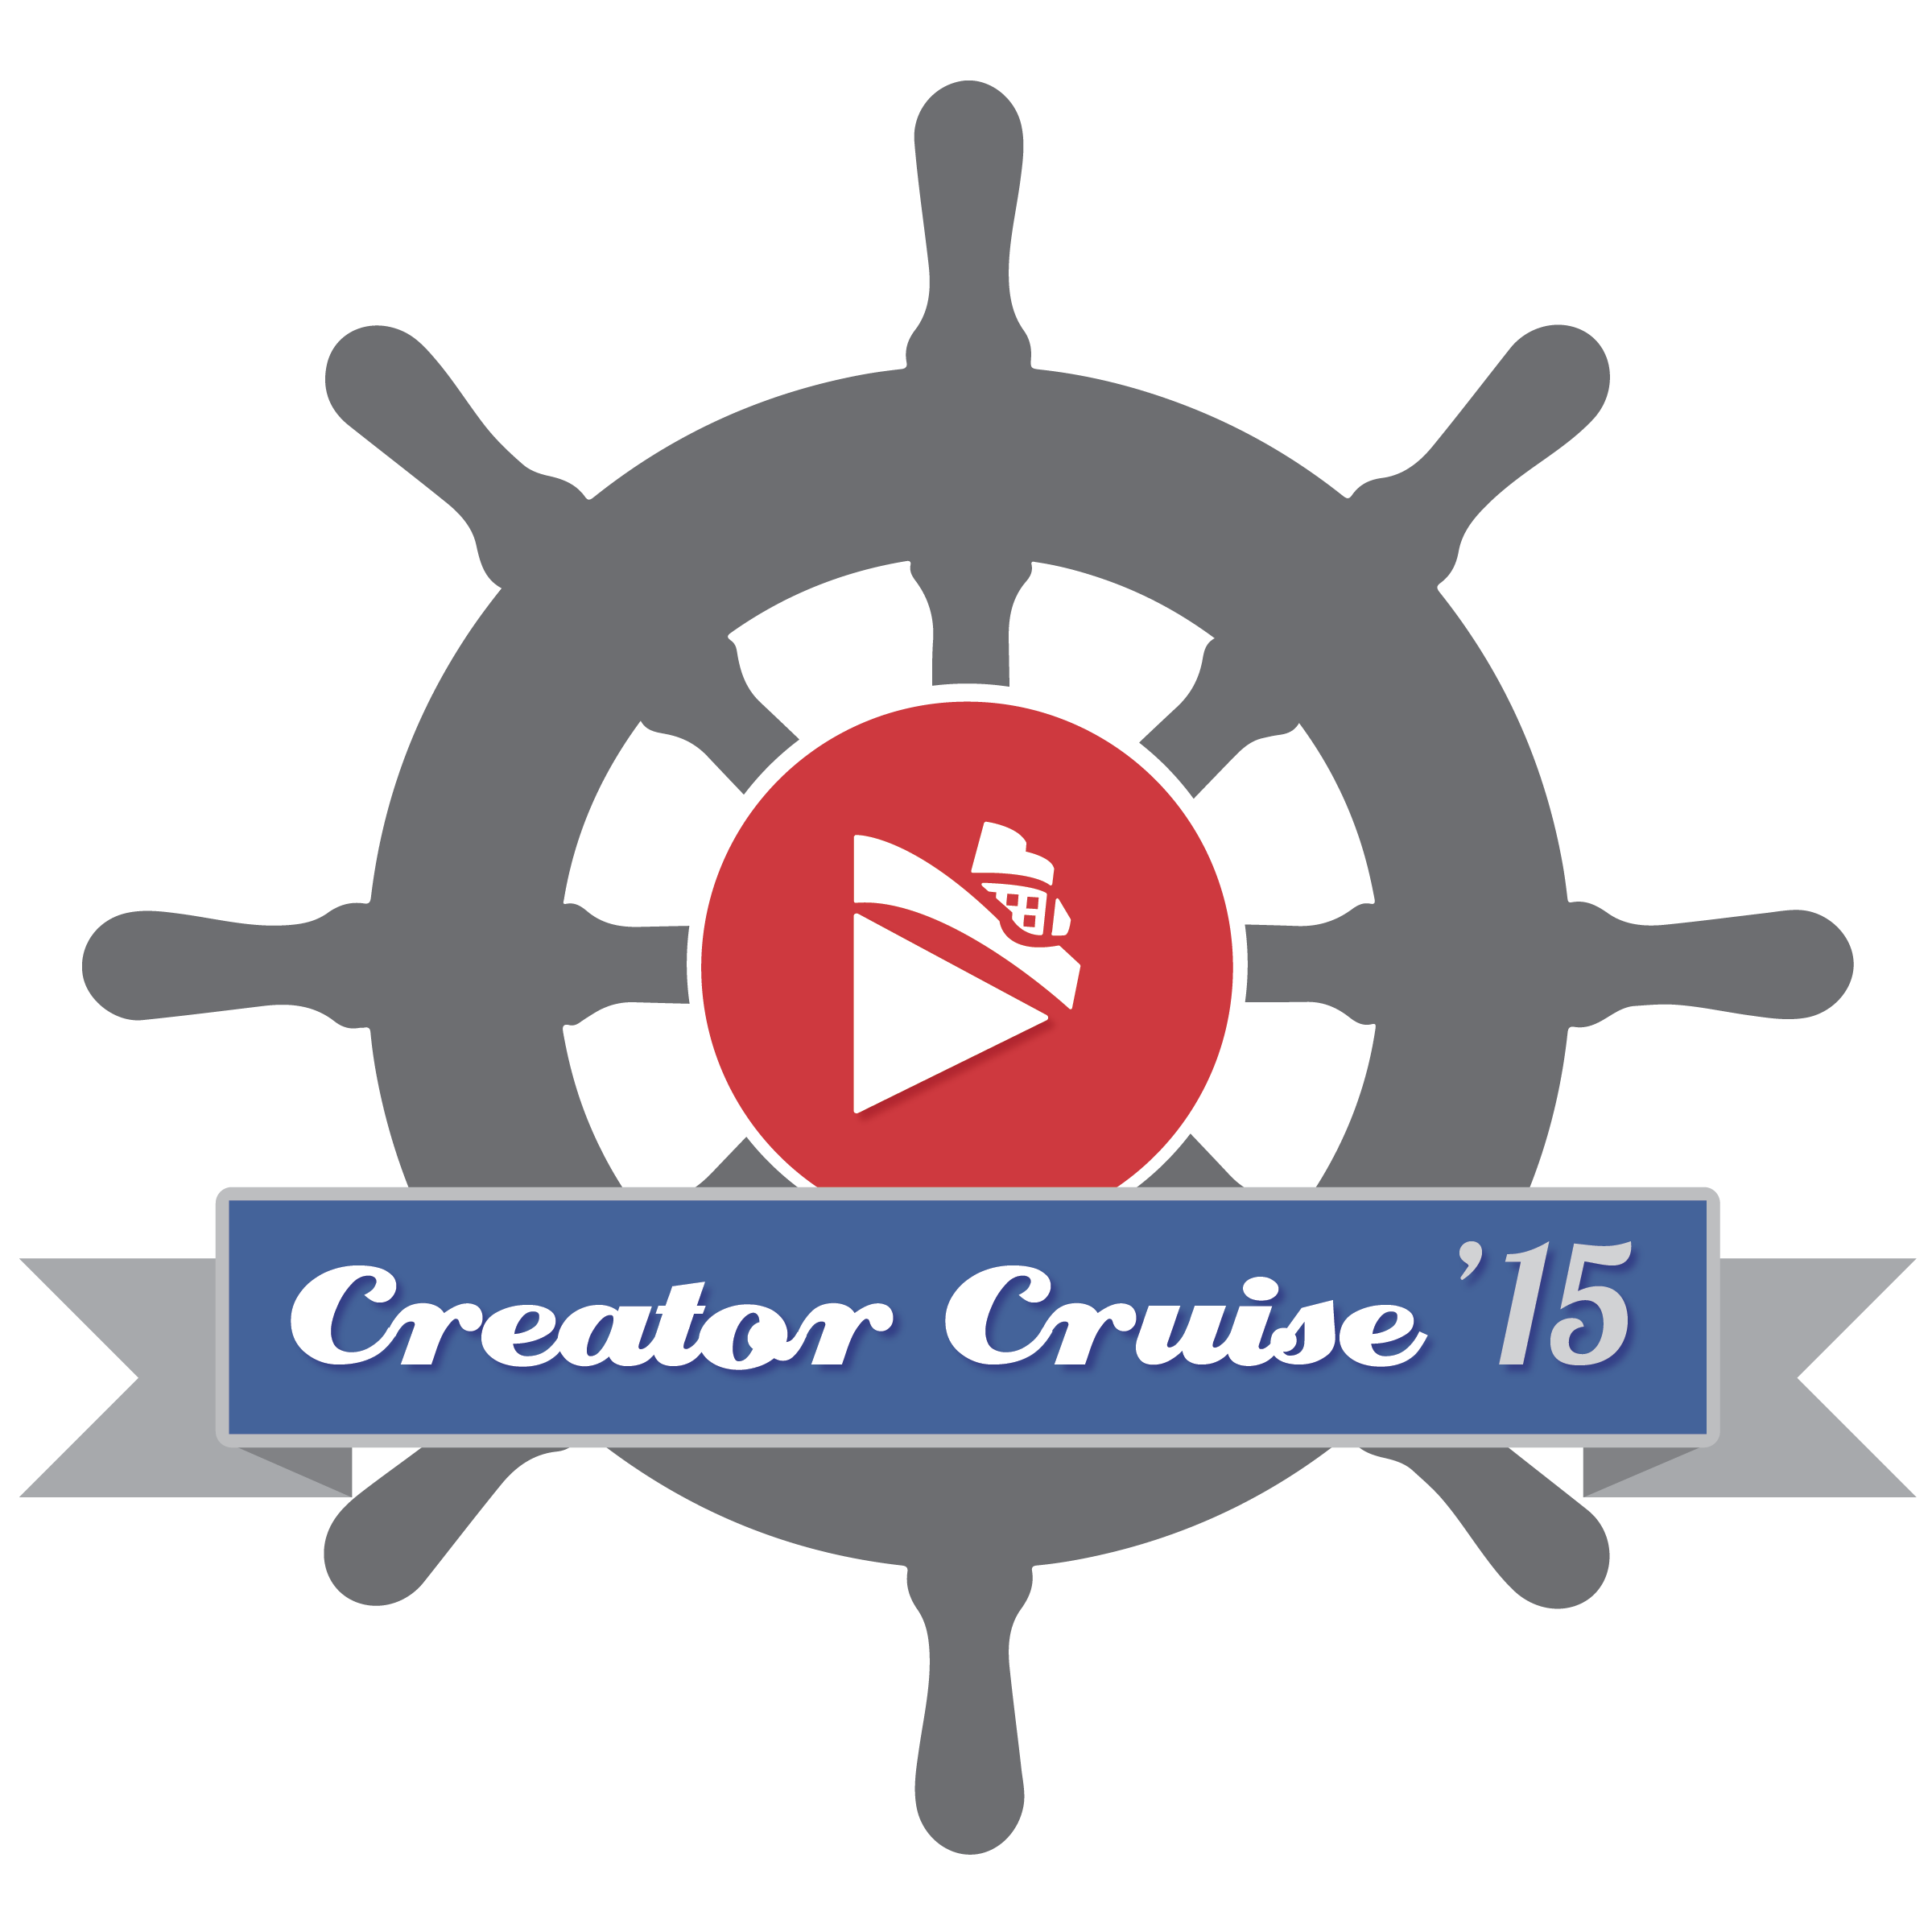 Hello Creators! Follow us for all the latest news, updates and announcements for the first YouTube cruise called Creator Cruise!